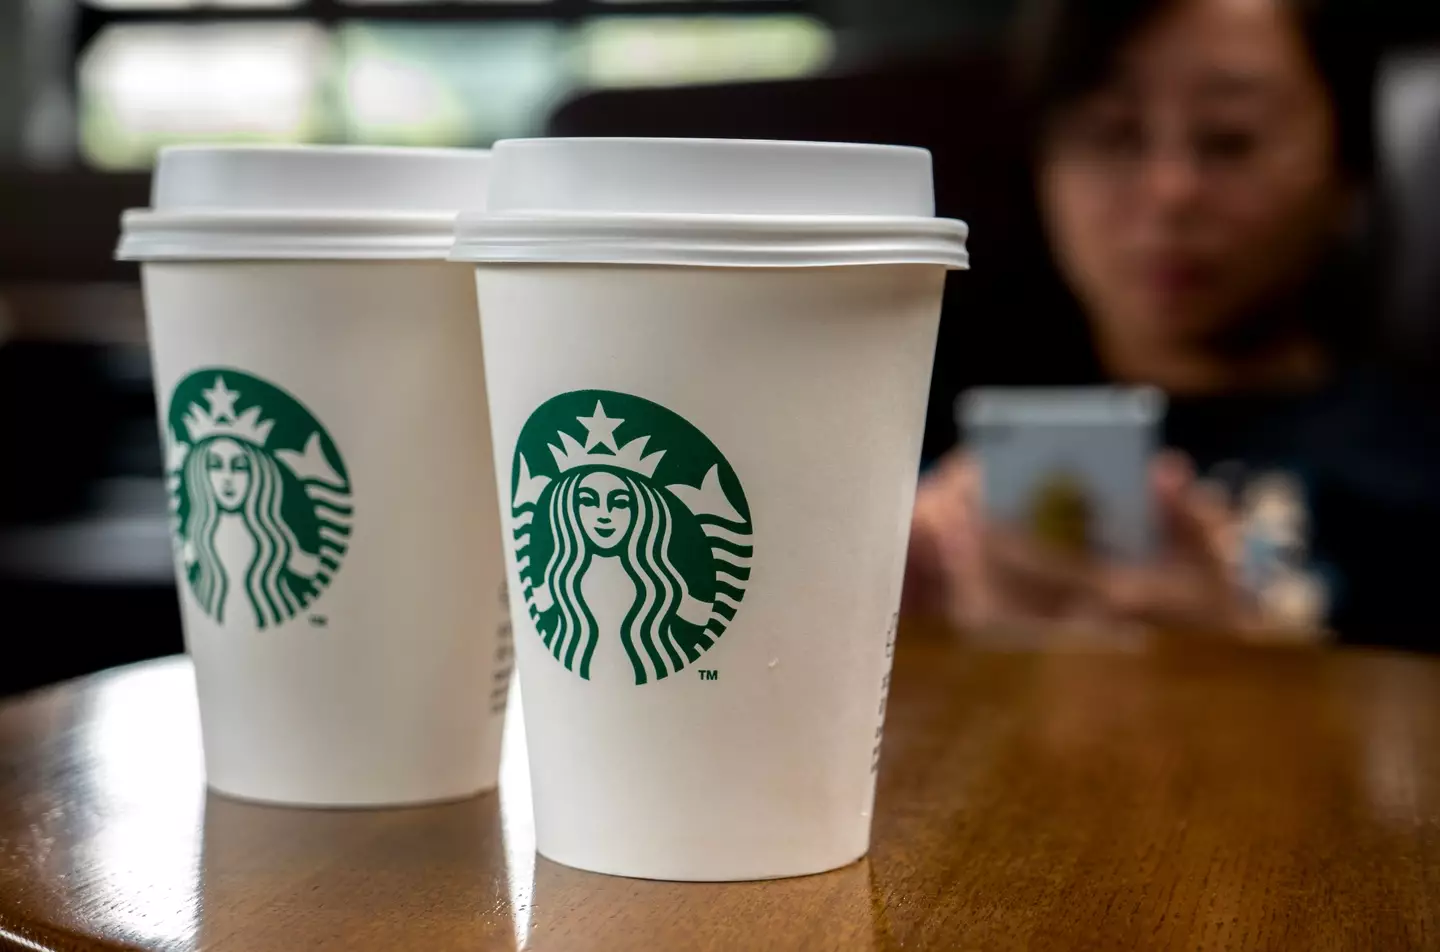 You can get free things with the Starbucks rewards program. (Zhang Peng/LightRocket via Getty Images)